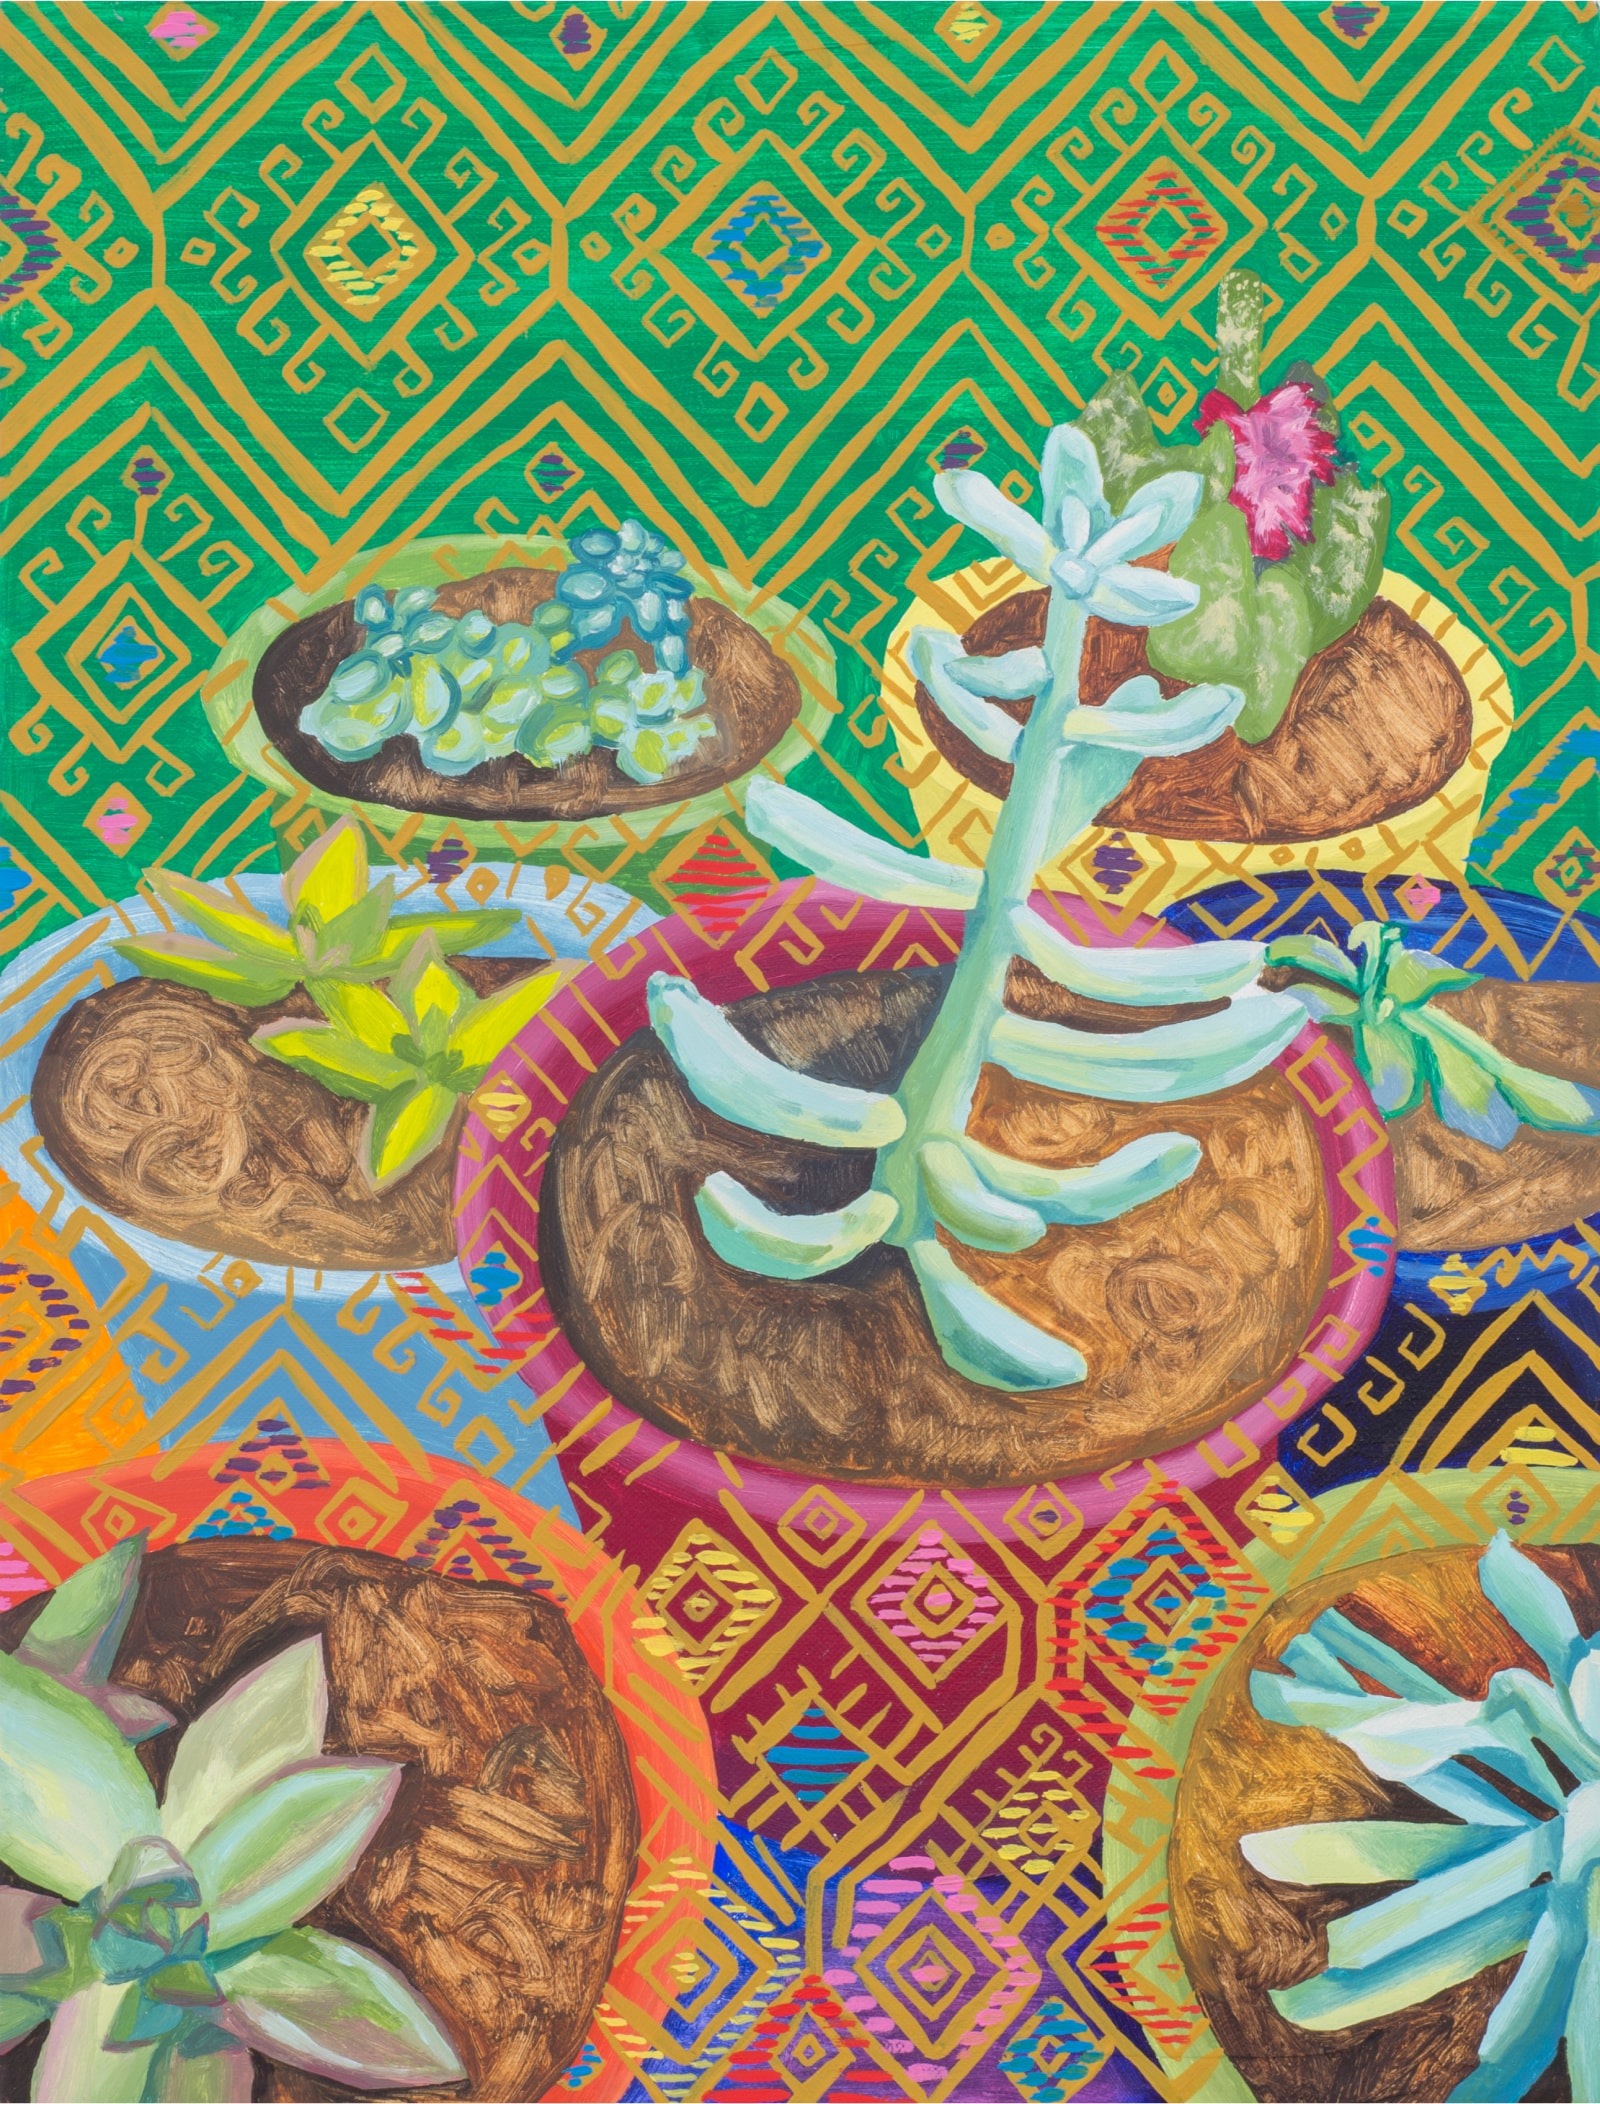 Artwork featuring seven potted succulents with a woven gold pattern overlaid on the pots and background